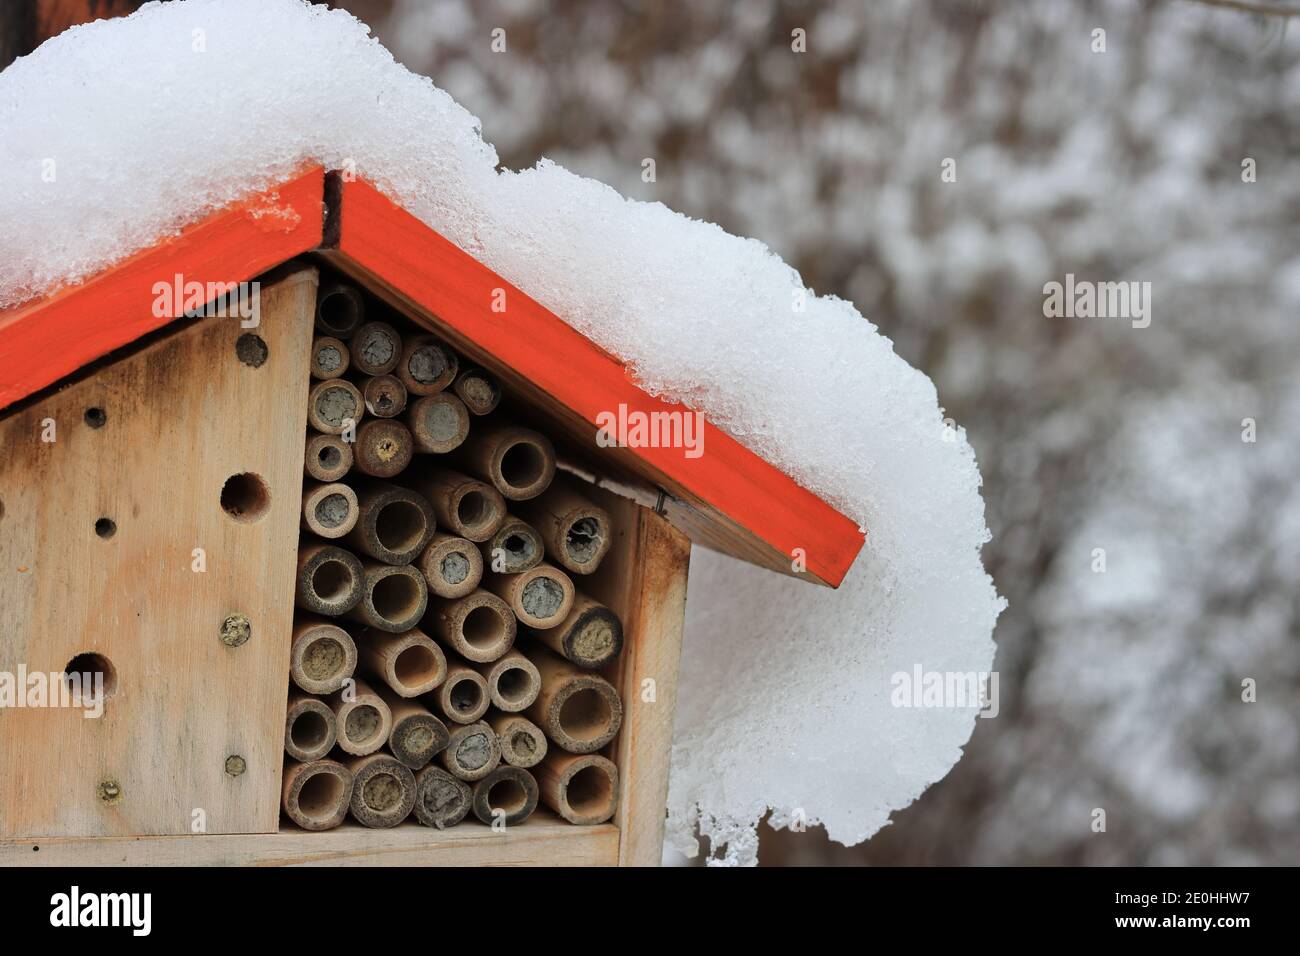 Snow on the roof of an insect hotel in the garden. Stock Photo